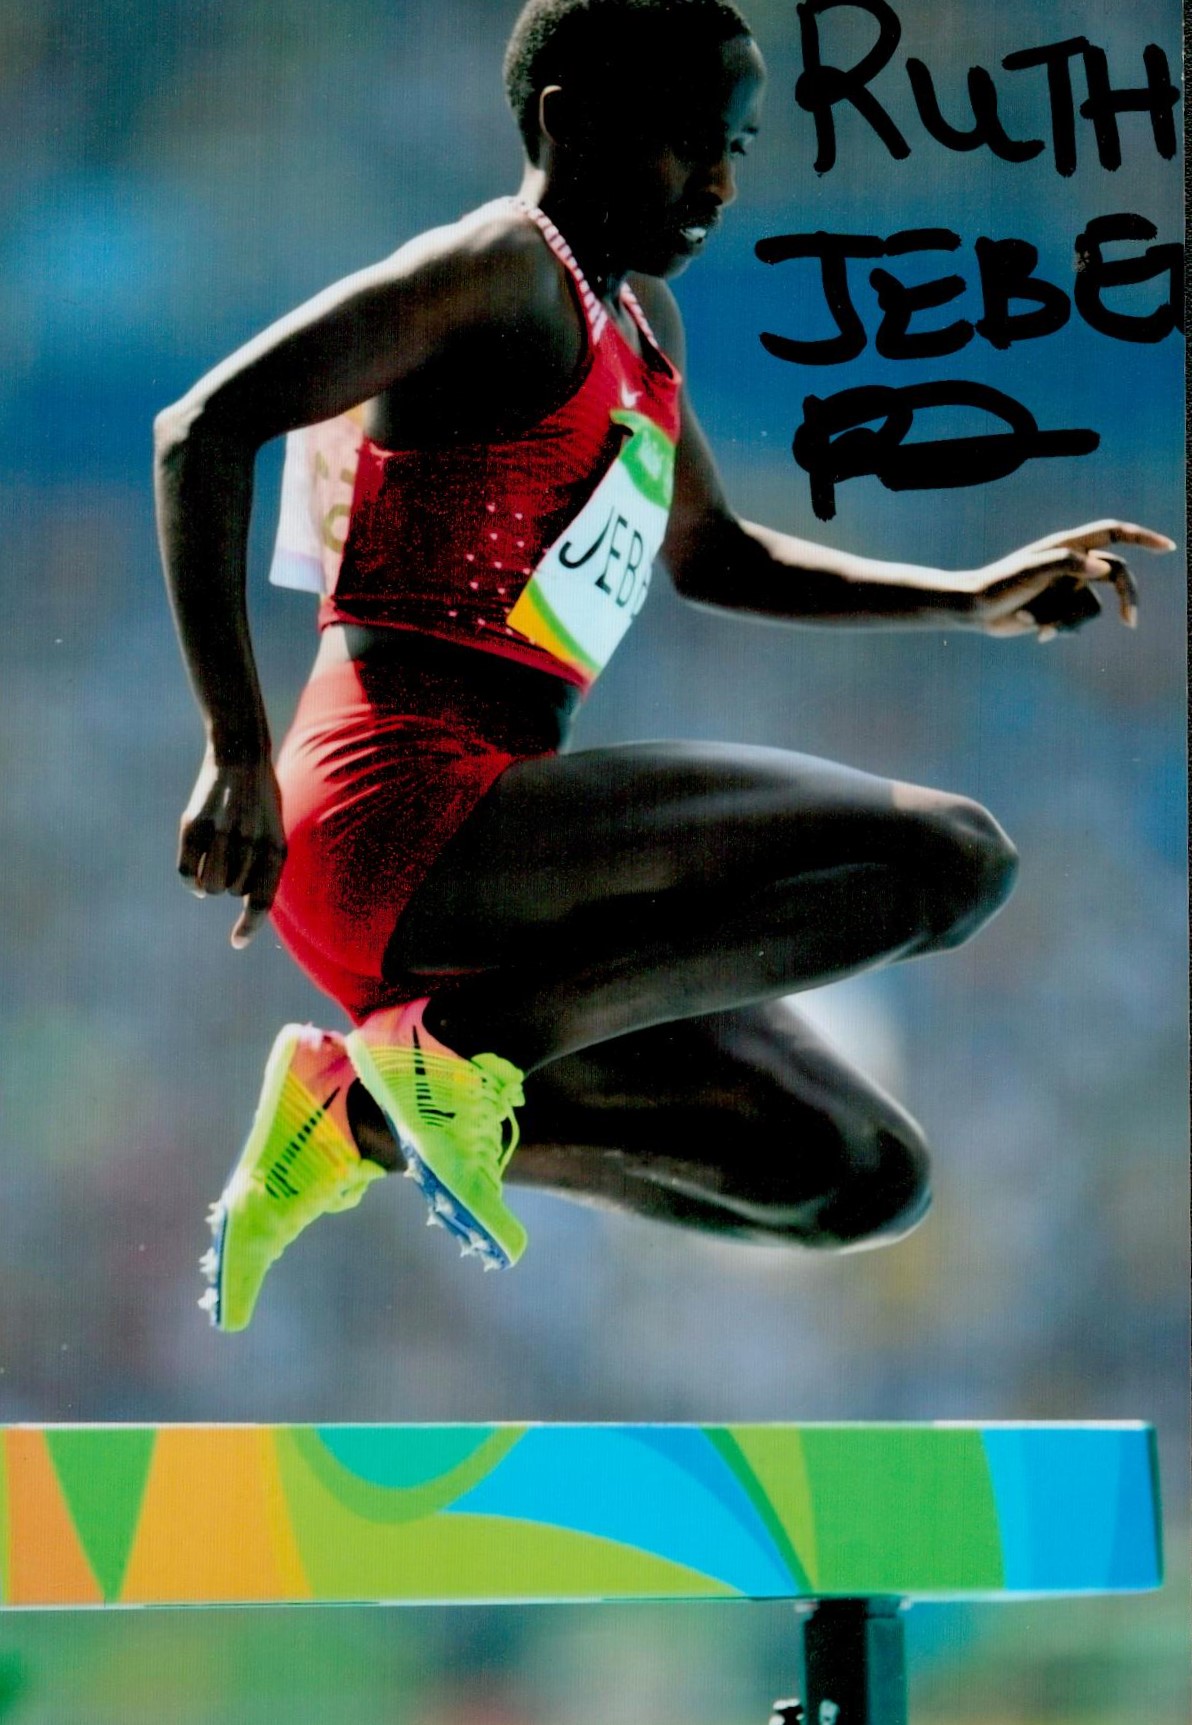 Olympics Ruth Jebet signed 6x4 colour photo winner of the Gold medal winner in the women's 2000